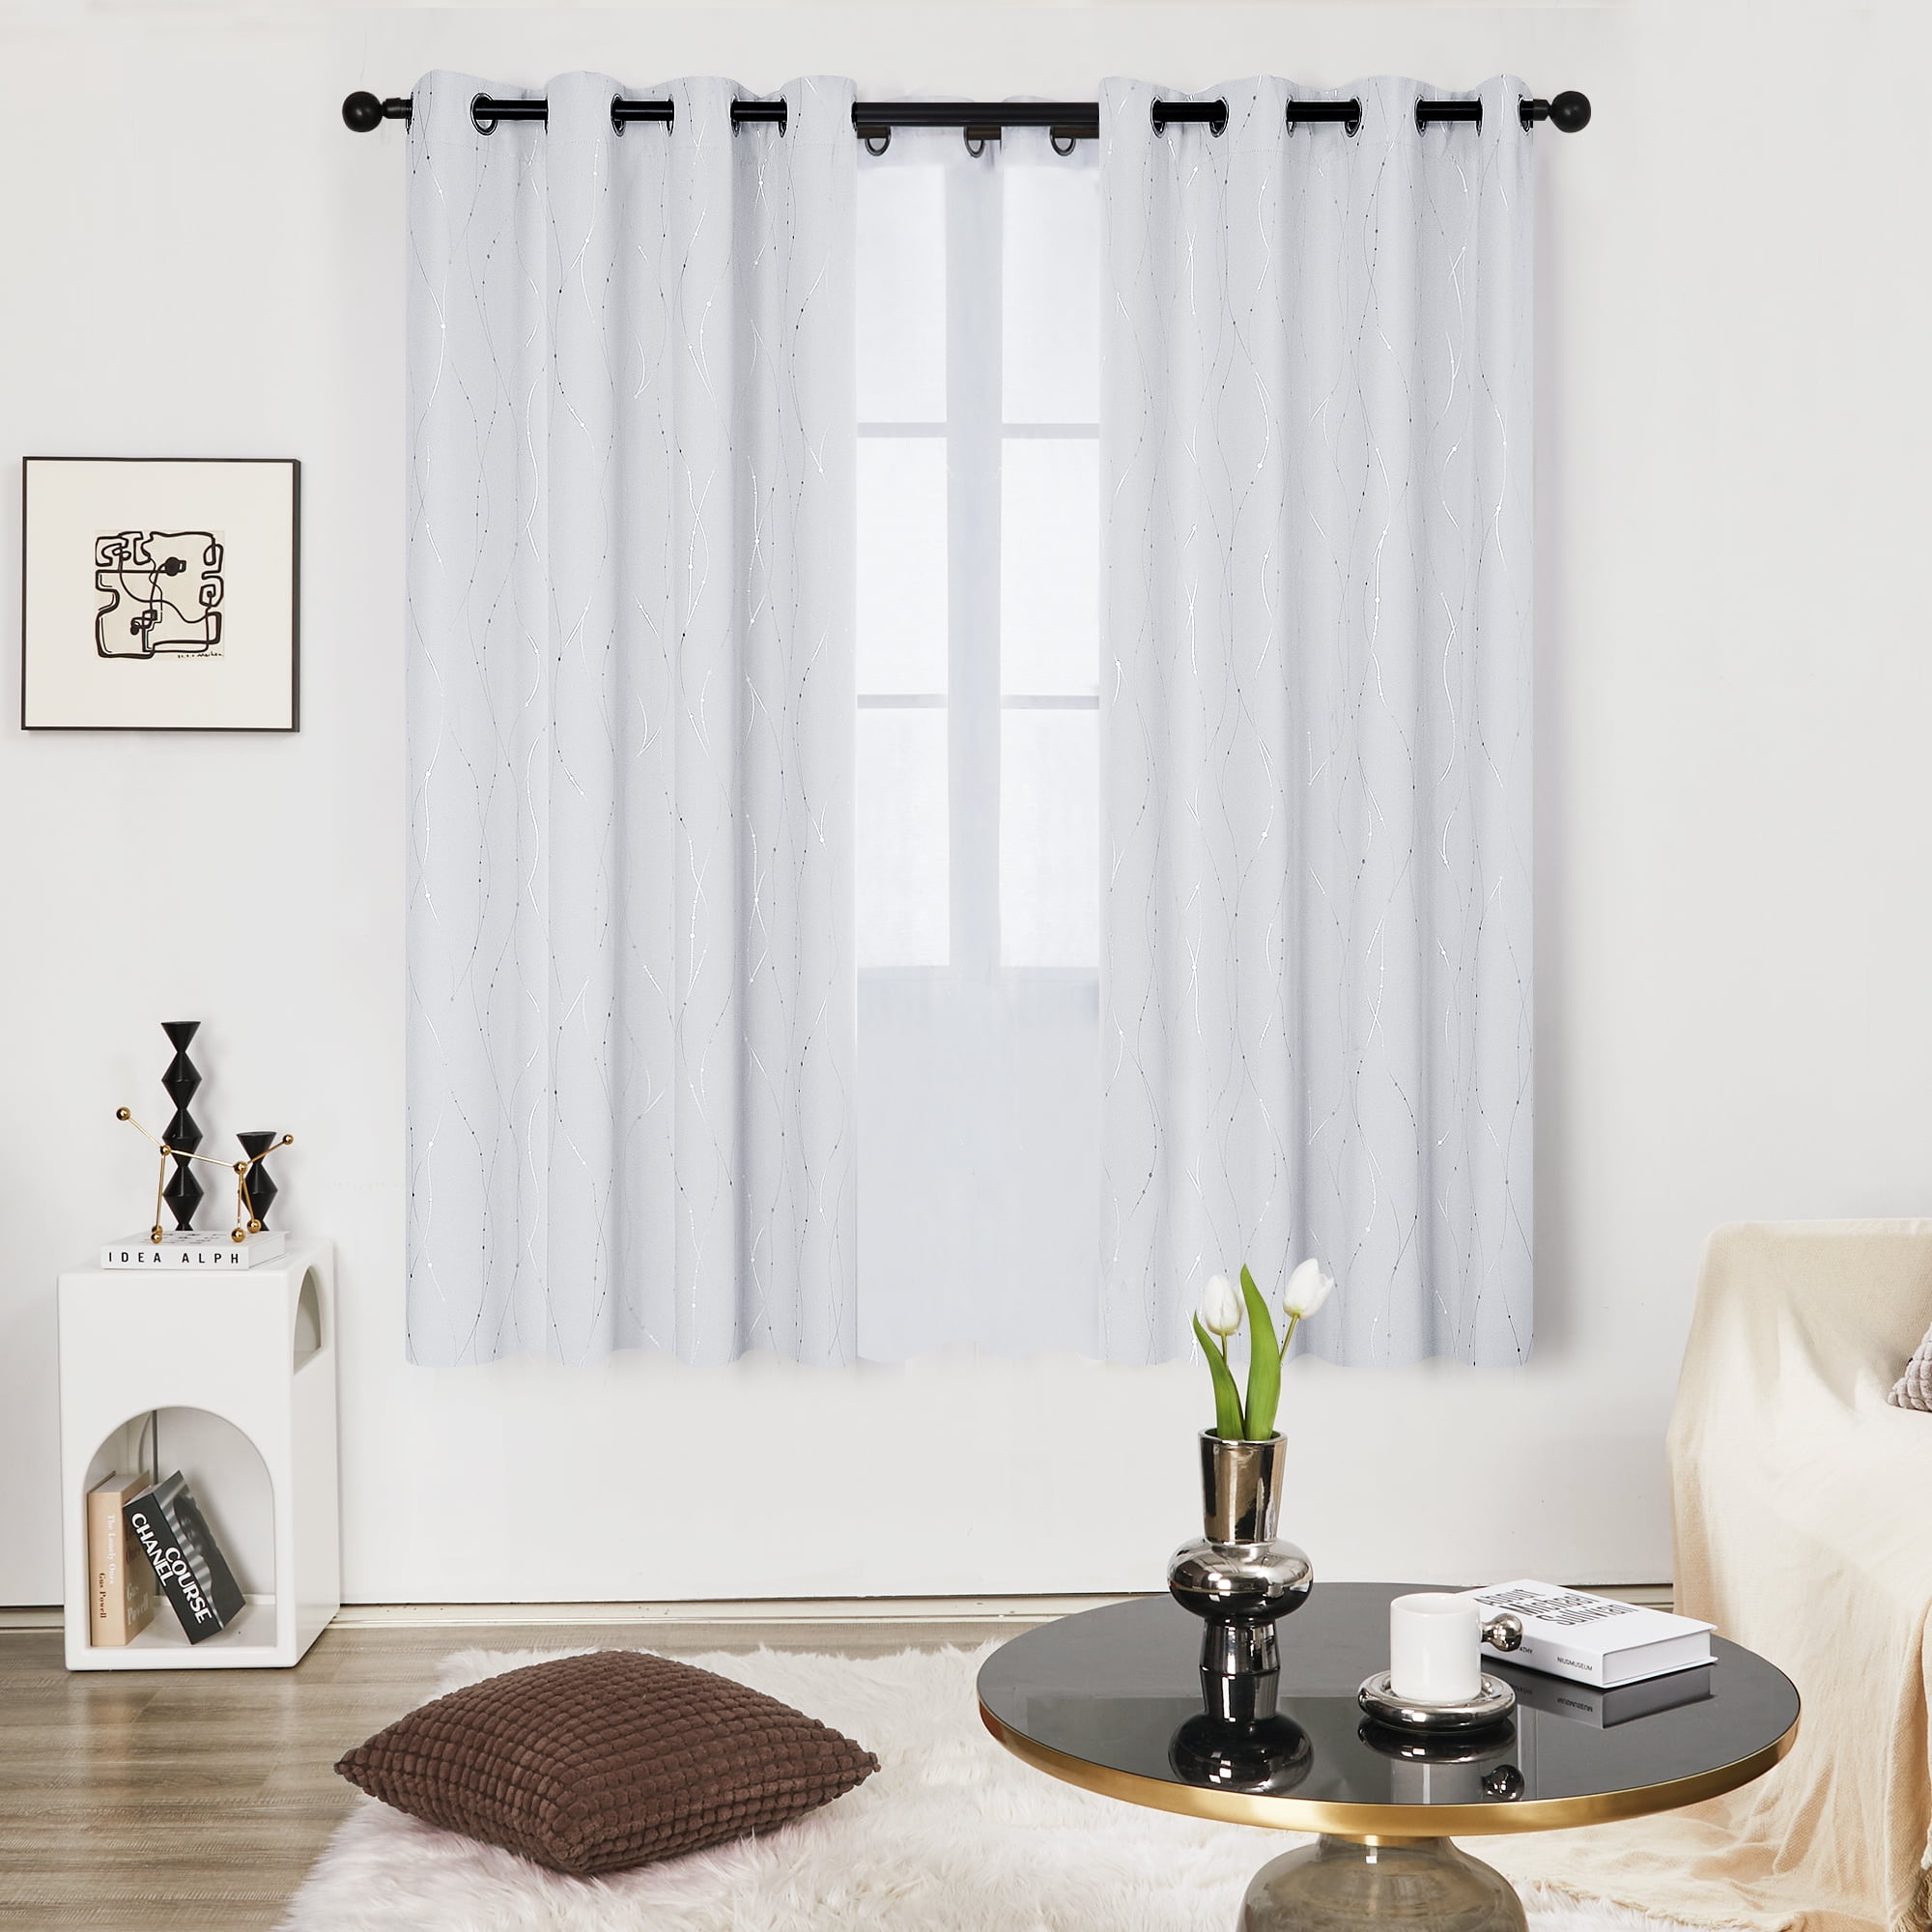  Joydeco Linen Blackout Curtains 72 Inches Long, Room Darkening  Curains for Bedroom Living Room, Natural Textured Thermal Curtains 72  Inches Long with Grommets(52x72 inch, Linen) : Home & Kitchen